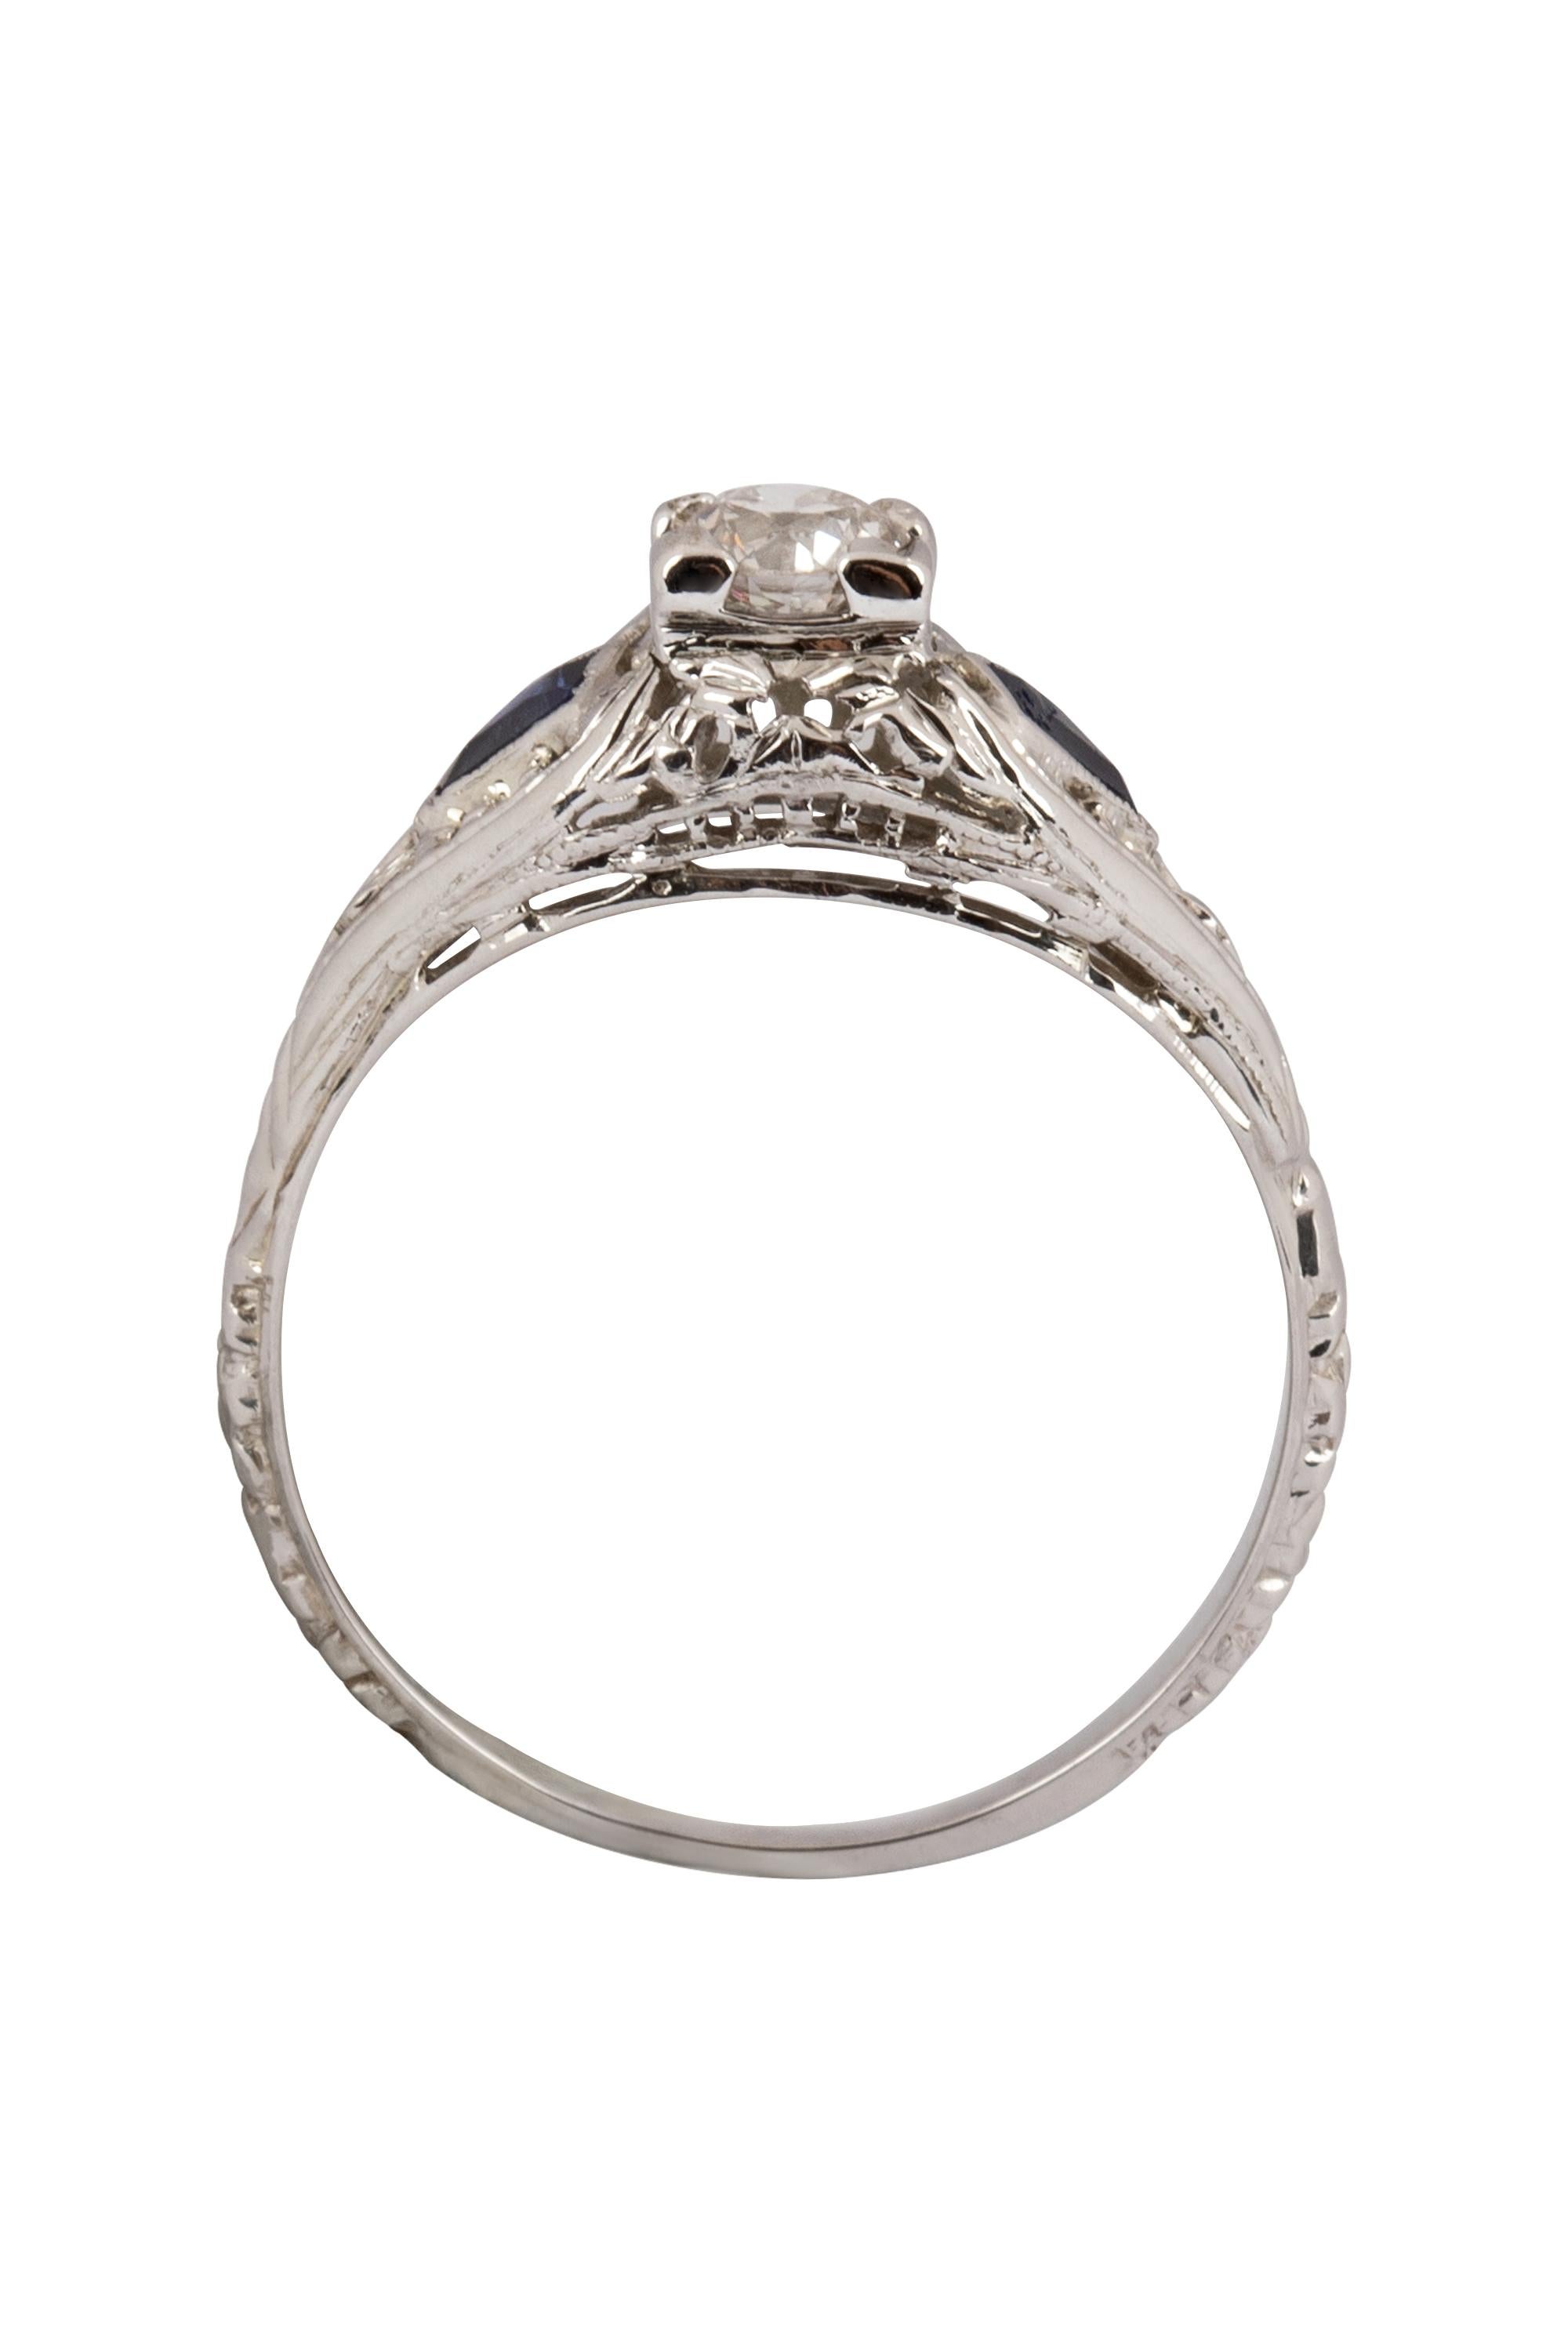 Art Deco Diamond and Sapphire Ring 18K White Gold In Good Condition For Sale In beverly hills, CA